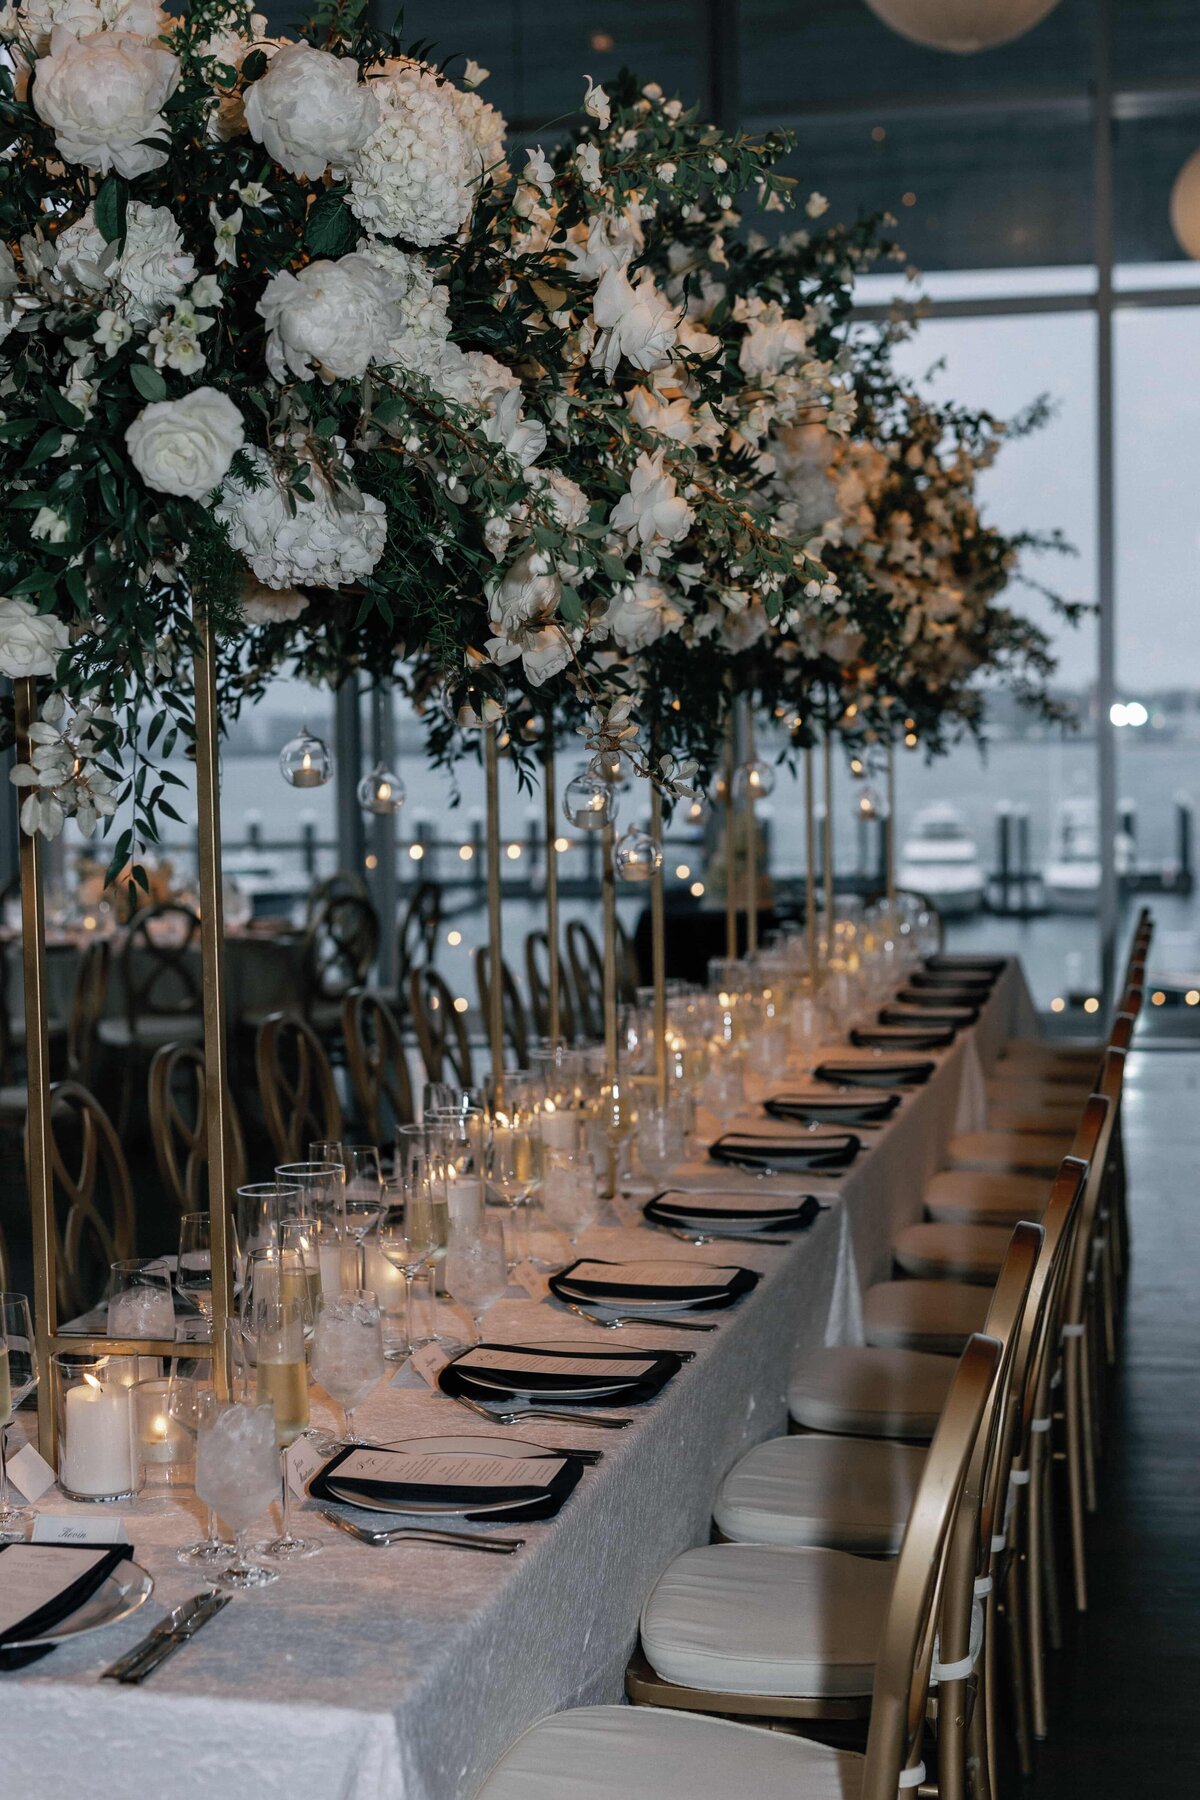 Wedding Reception in Boston - Cru and Co Events